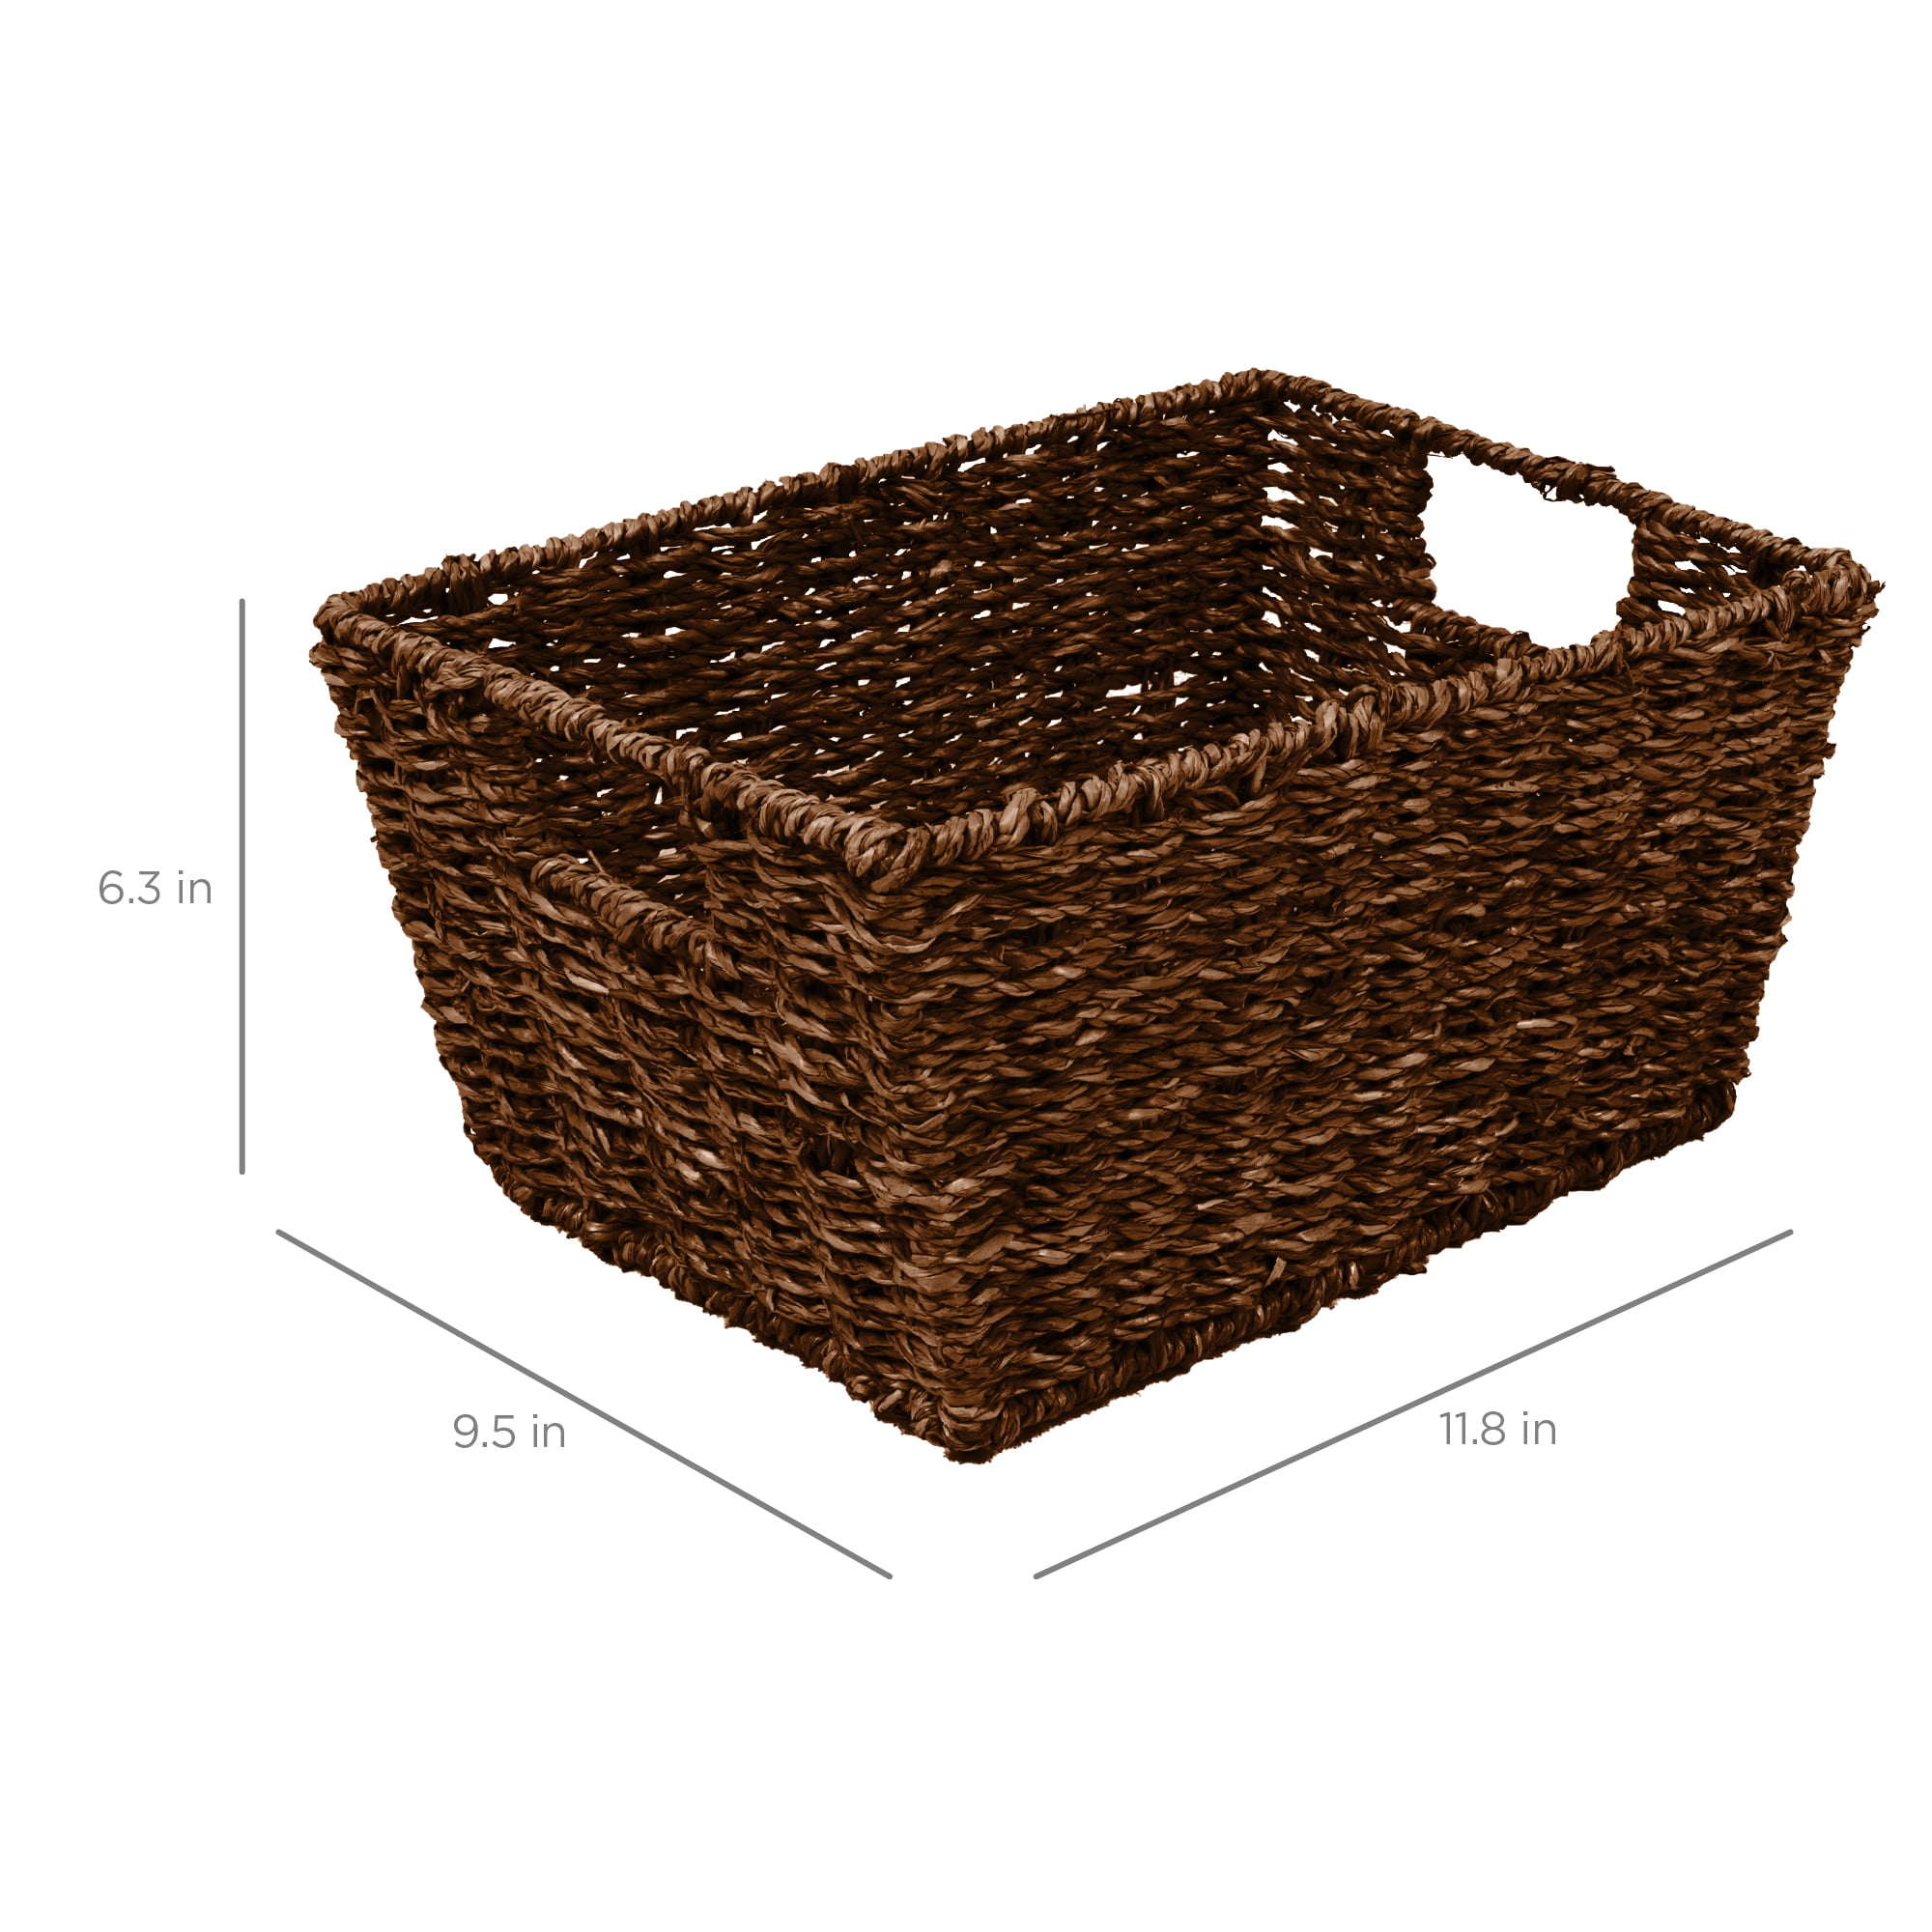 Multi-Purpose Nesting Seagrass Woven Storage Basket with Handles Set of 4 